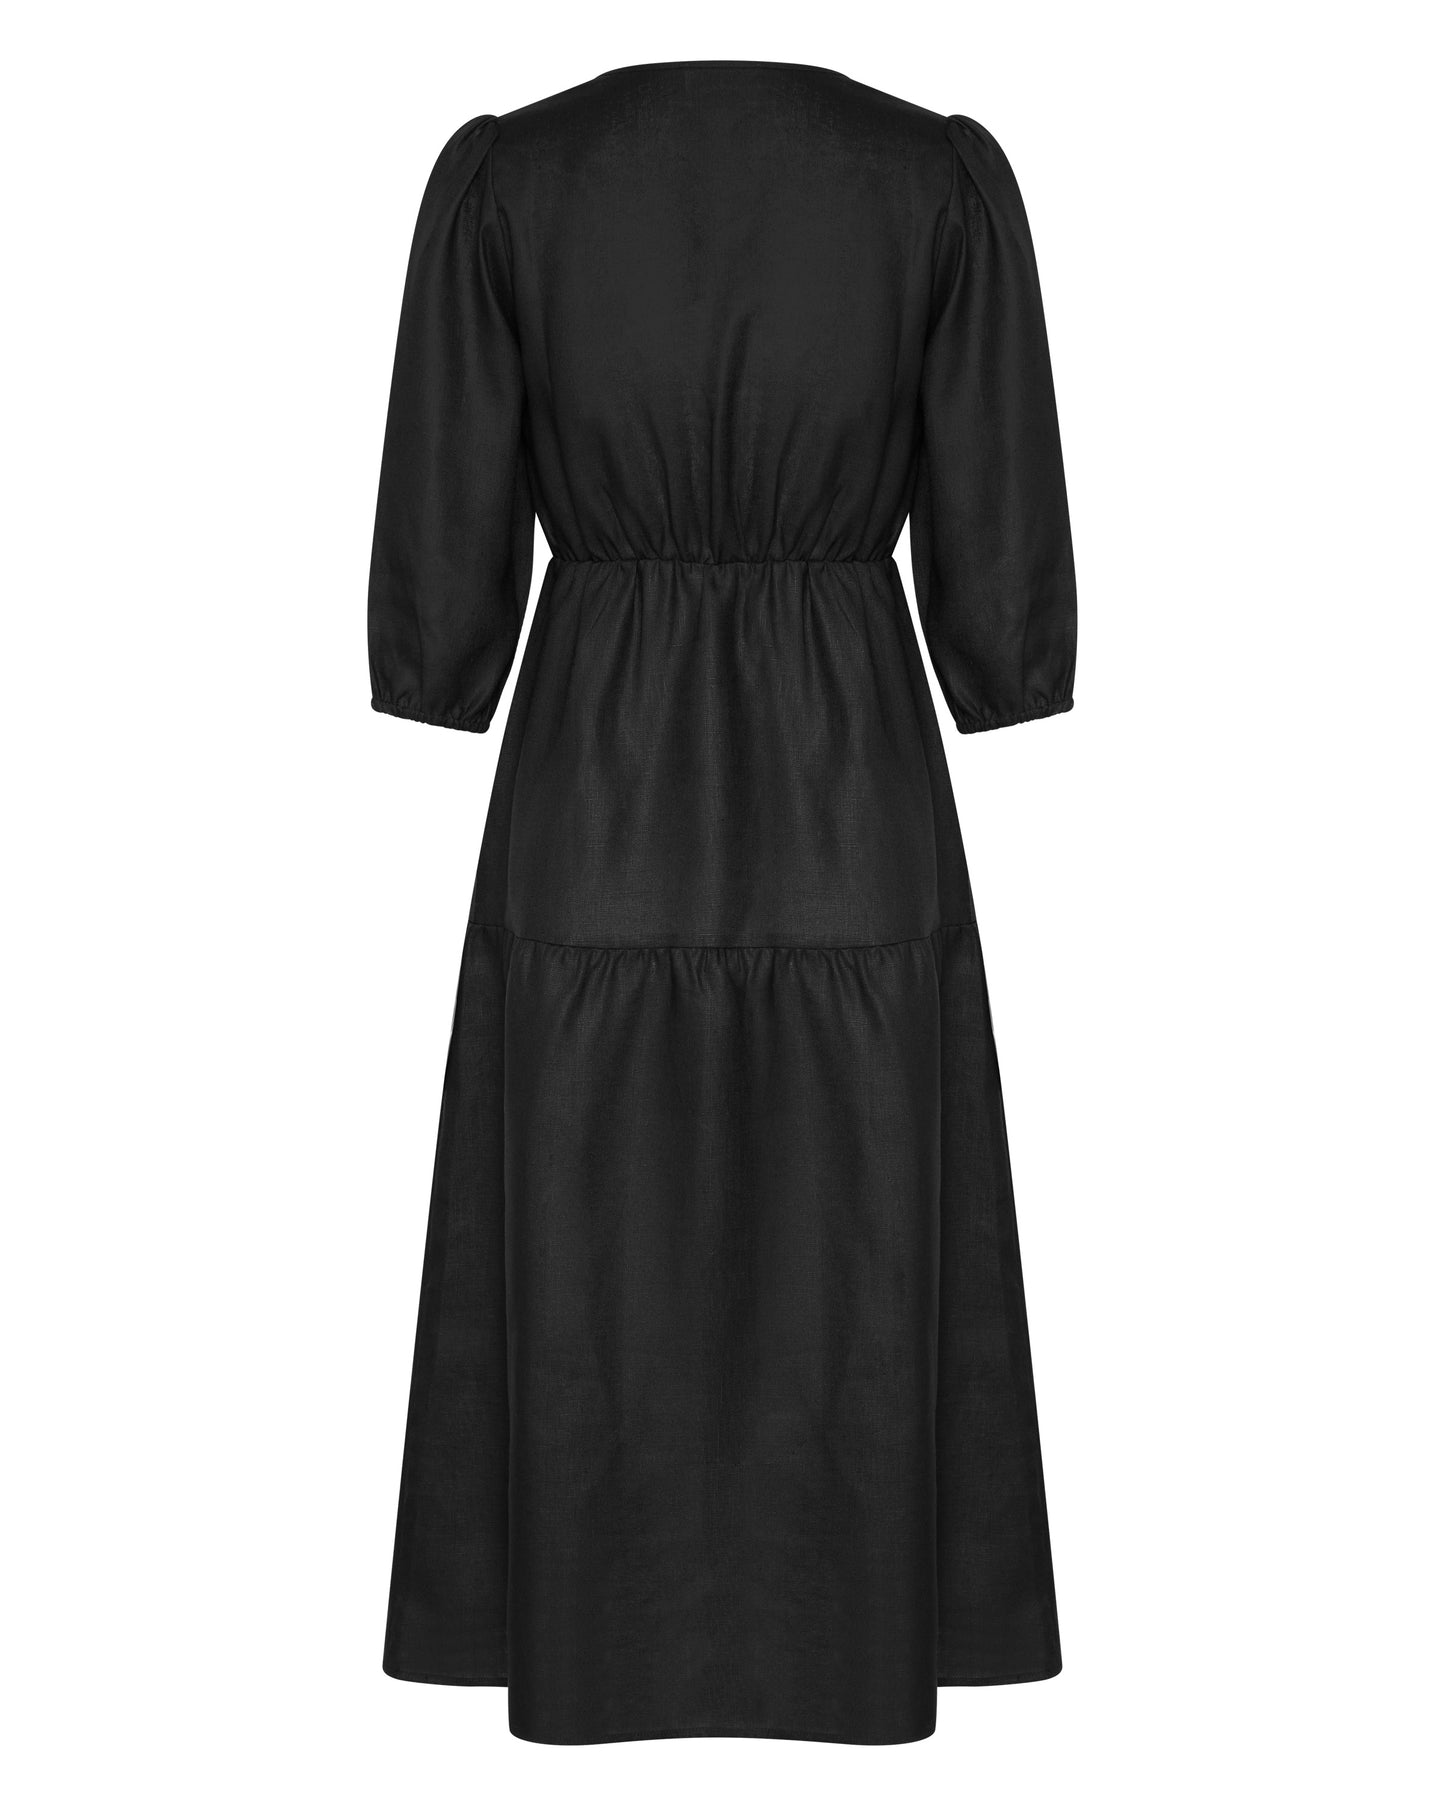 The back of a long black linen dress, with three quarter sleeves.